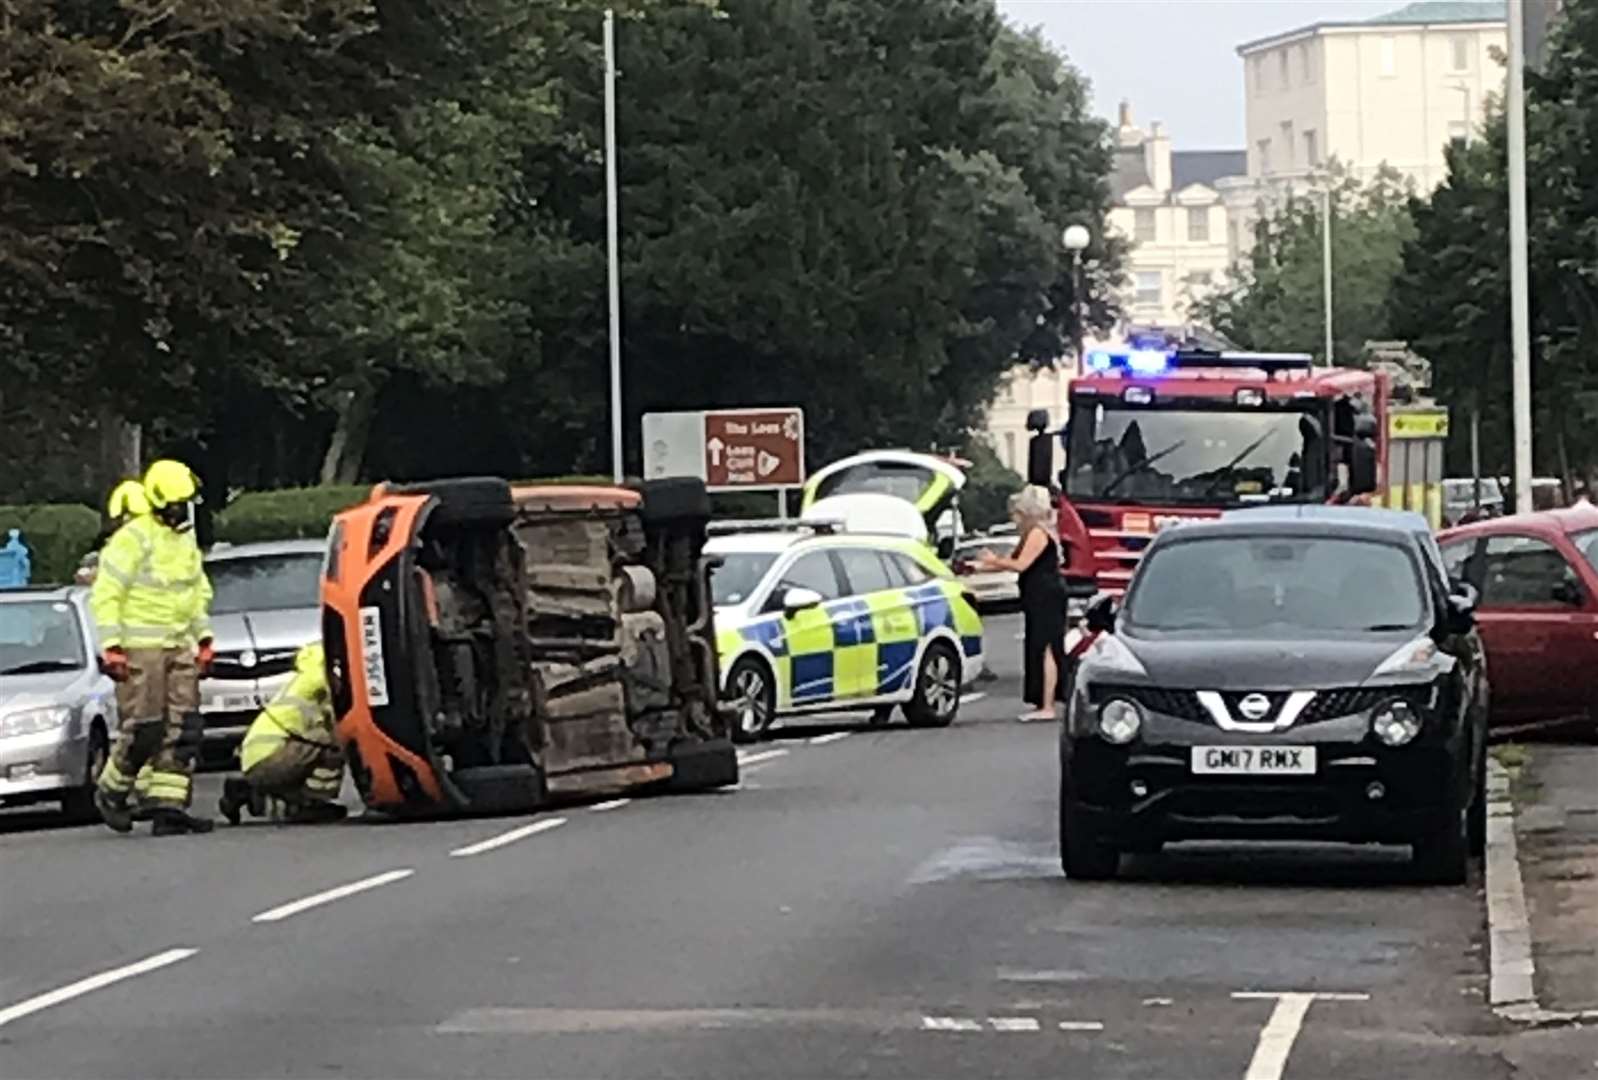 The aftermath of a crash on Sandgate Road in Folkestone in July 2021. Picture: Ian Everley